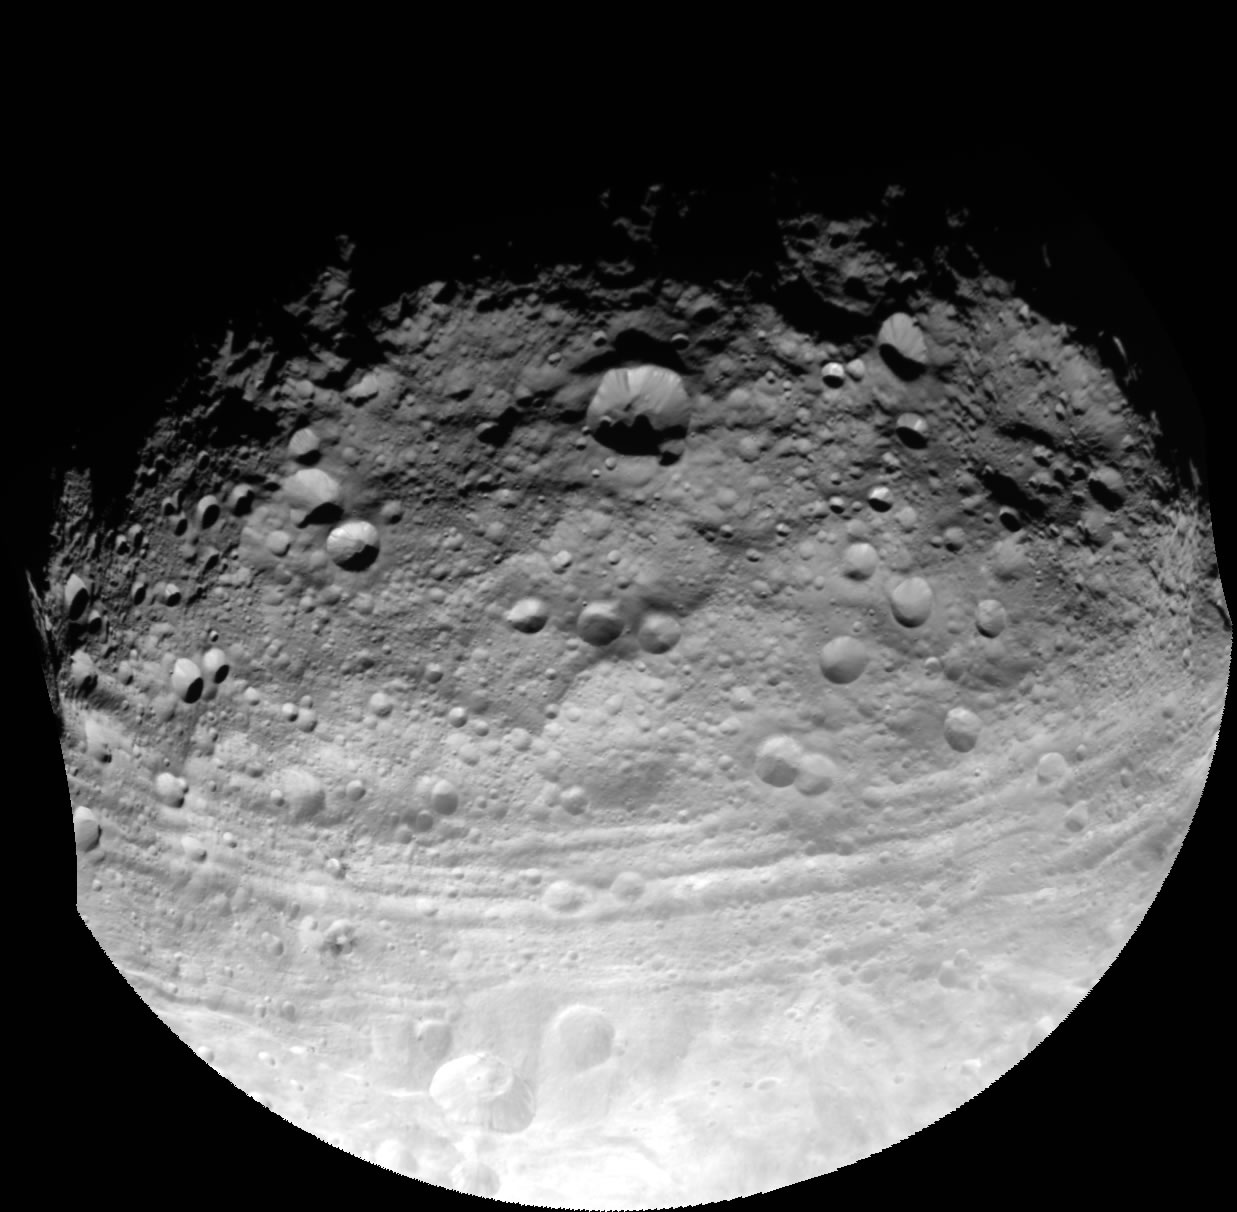 Giant asteroid (or protoplanet) Vesta as seen by NASA's Dawn spacecraft.